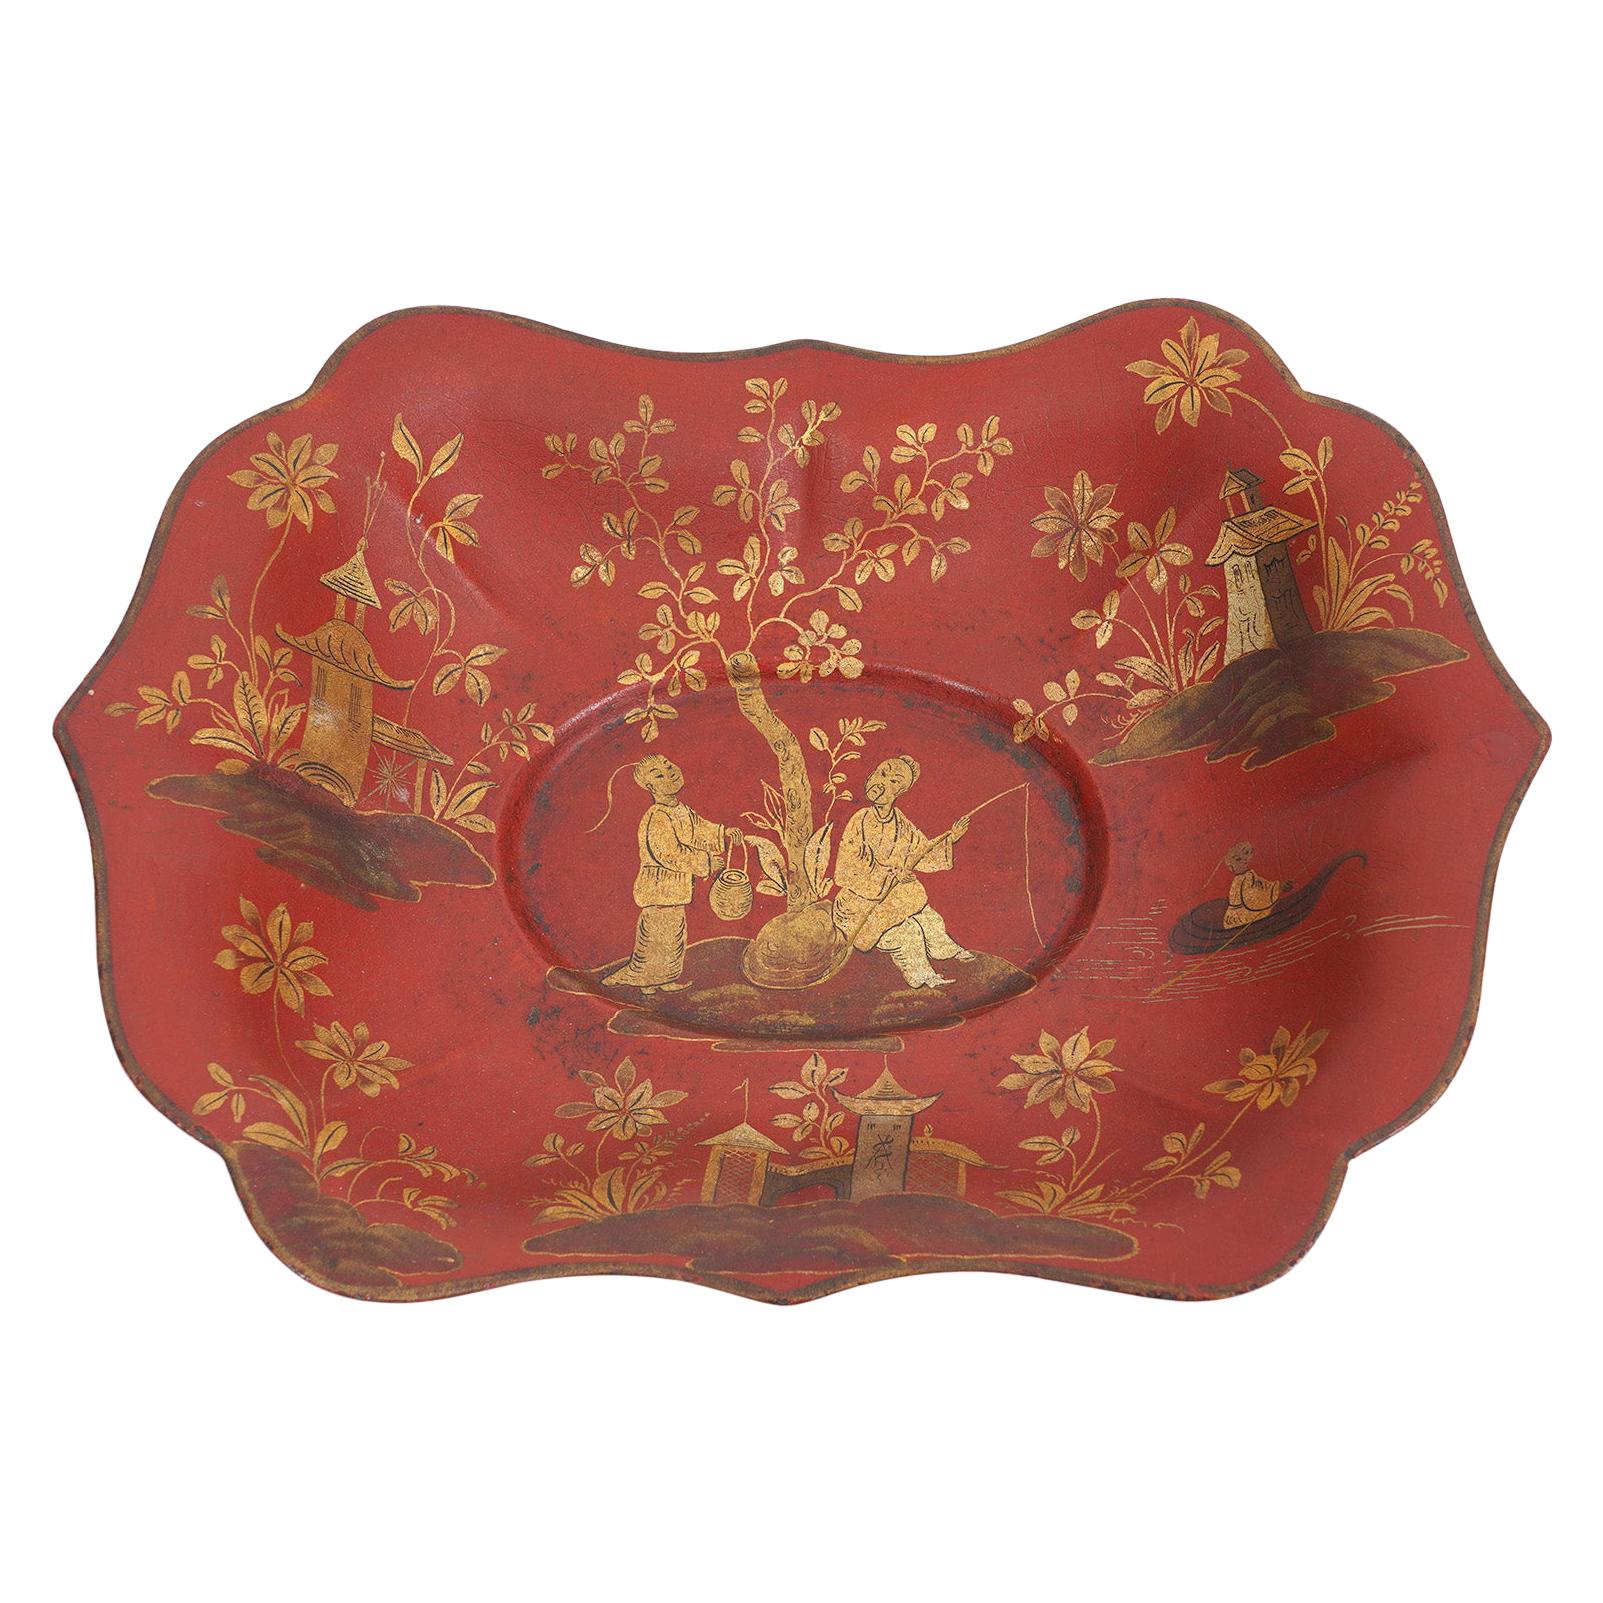 19th Cent. English Chinoiserie Red Lacquer and Gilt Decoration Shallow Tole Bowl